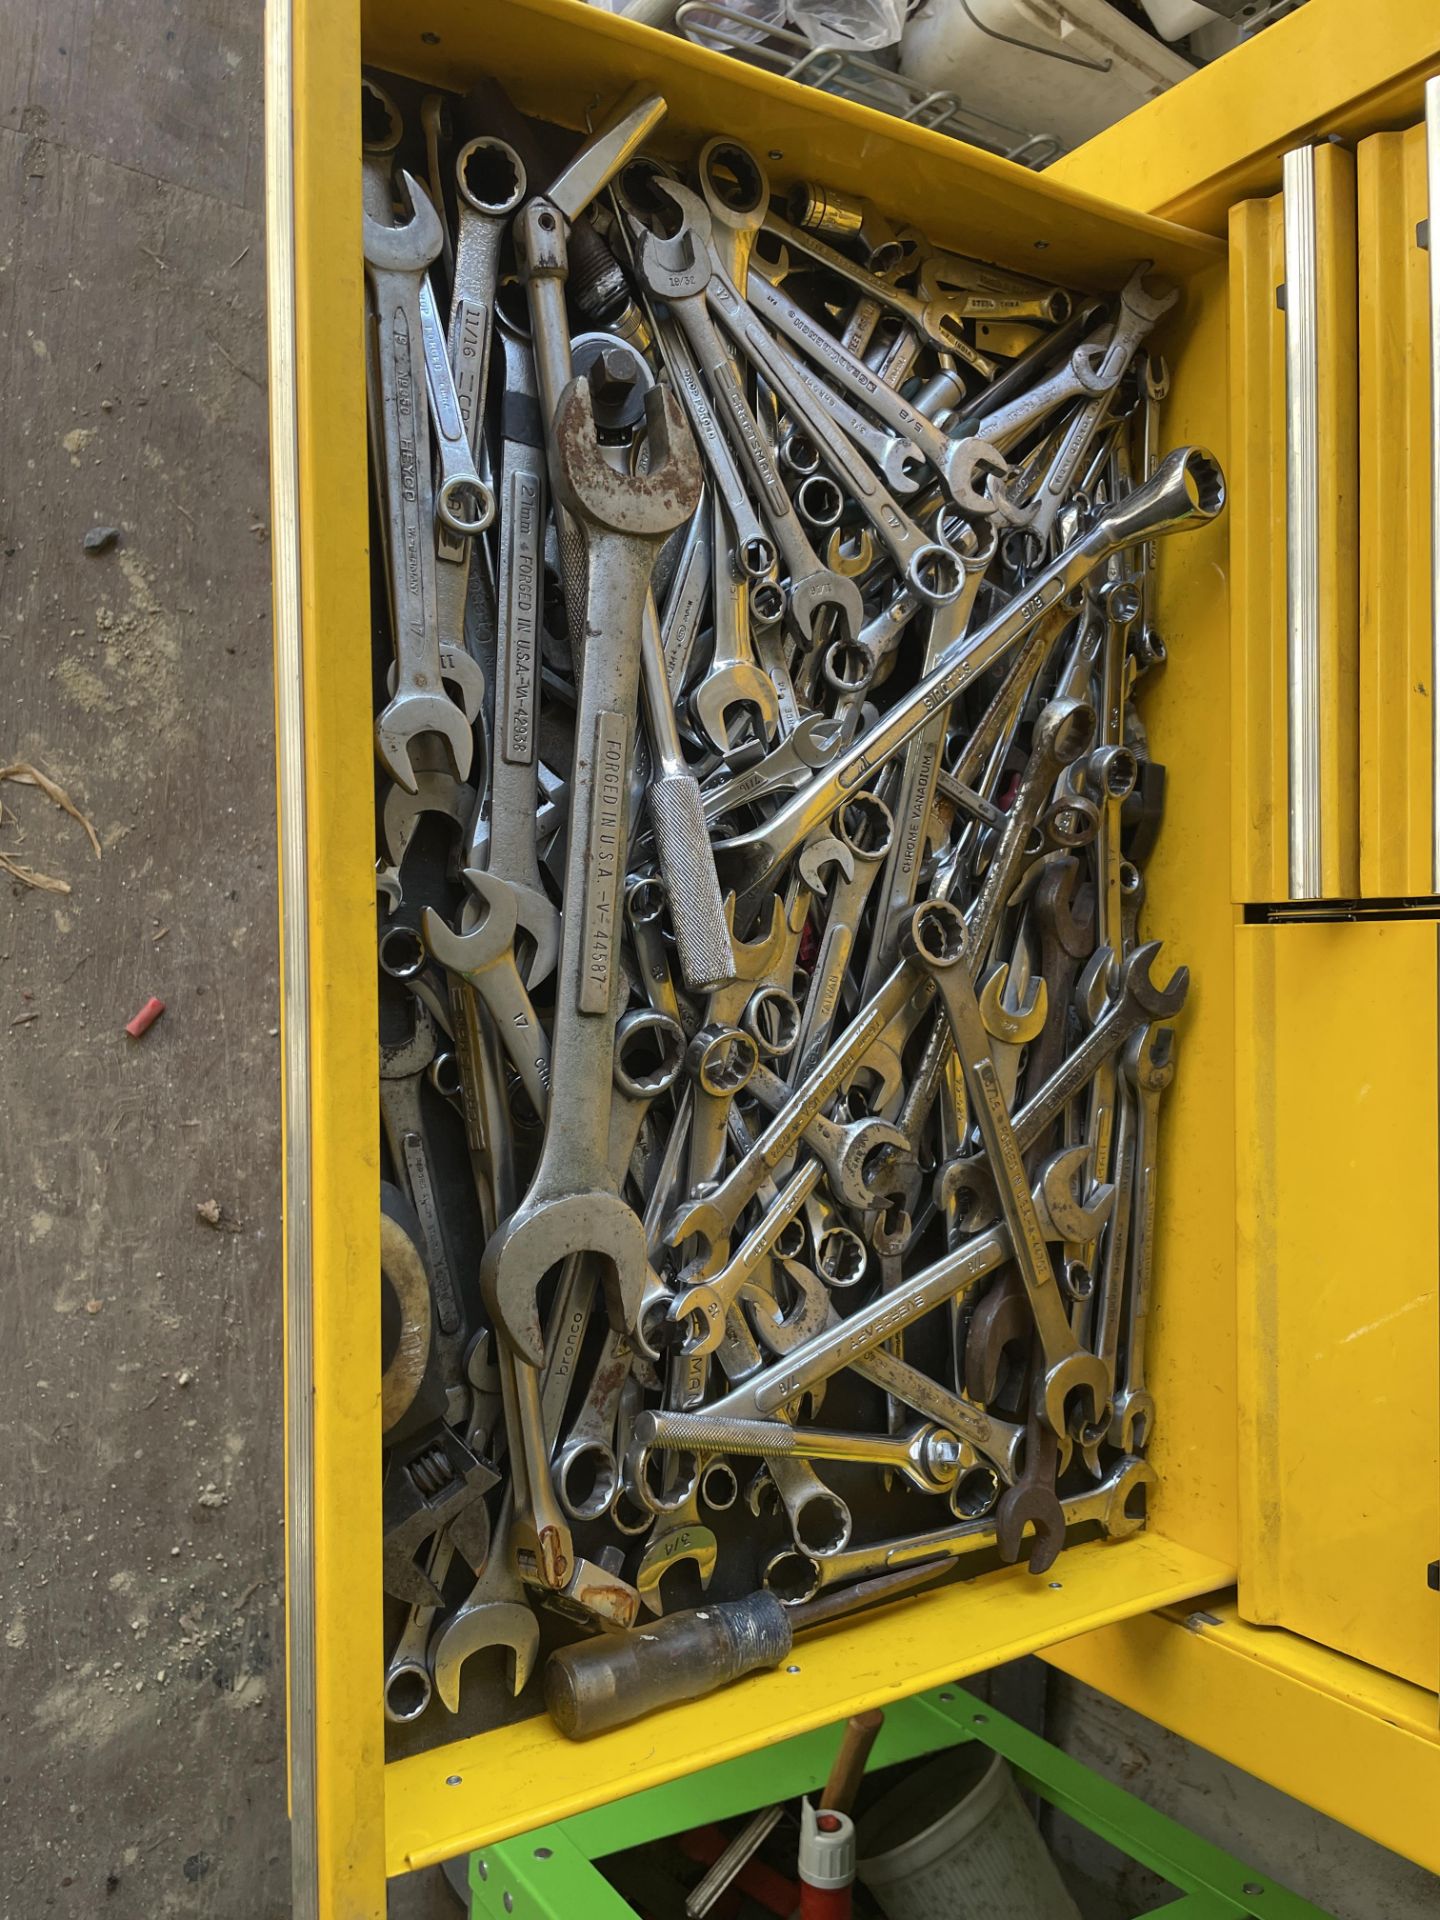 US General Port 5 Drawer Tool Box, Contents Included (Yellow) - Image 4 of 5